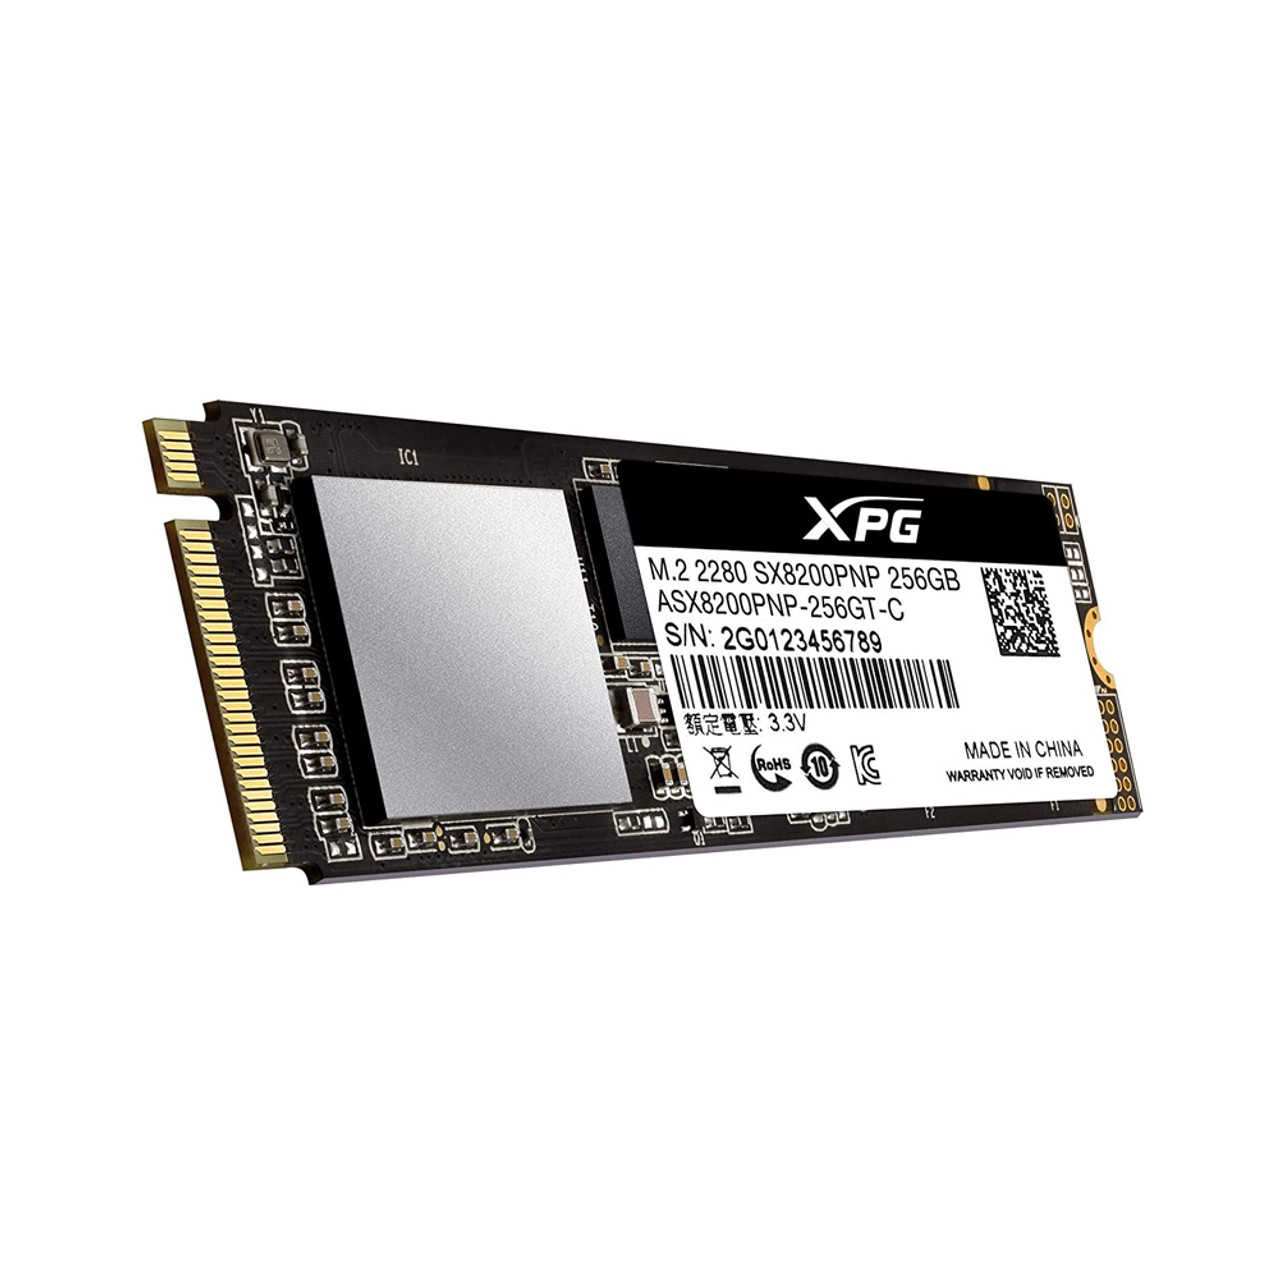 XPG ASX8200PNP-256GT-C SX8200 Pro 256GB 3D NAND NVMe Gen3x4 PCIe M.2 2280 Solid State Drive